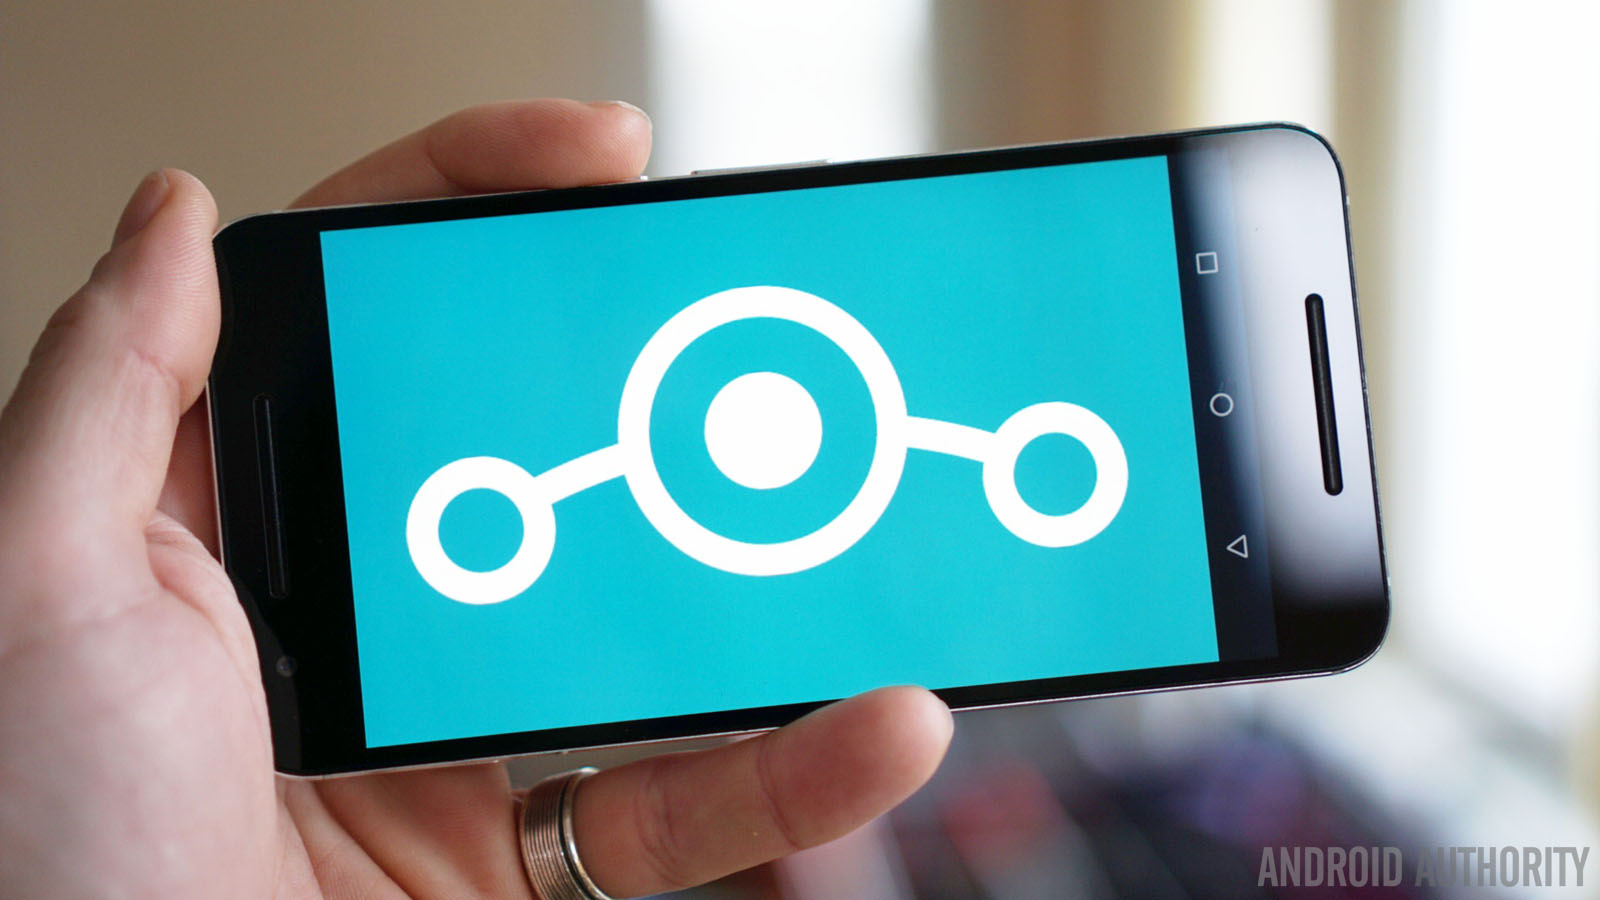 Lineage OS on a smartphone - lineage os devices